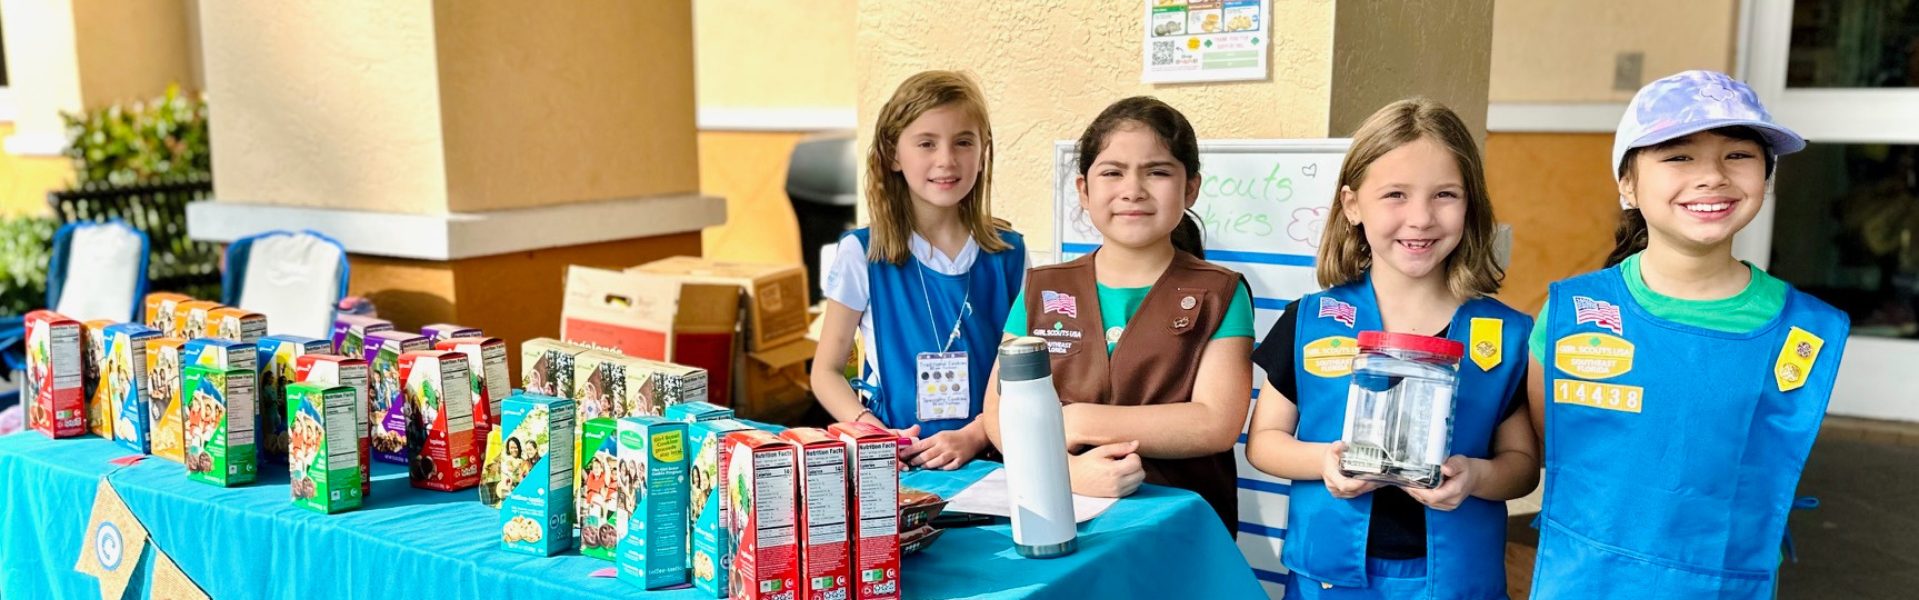  girl scouts selling cookies with one girl in front of booth holding sign that says "girl scout cookie proceeds stay local" 